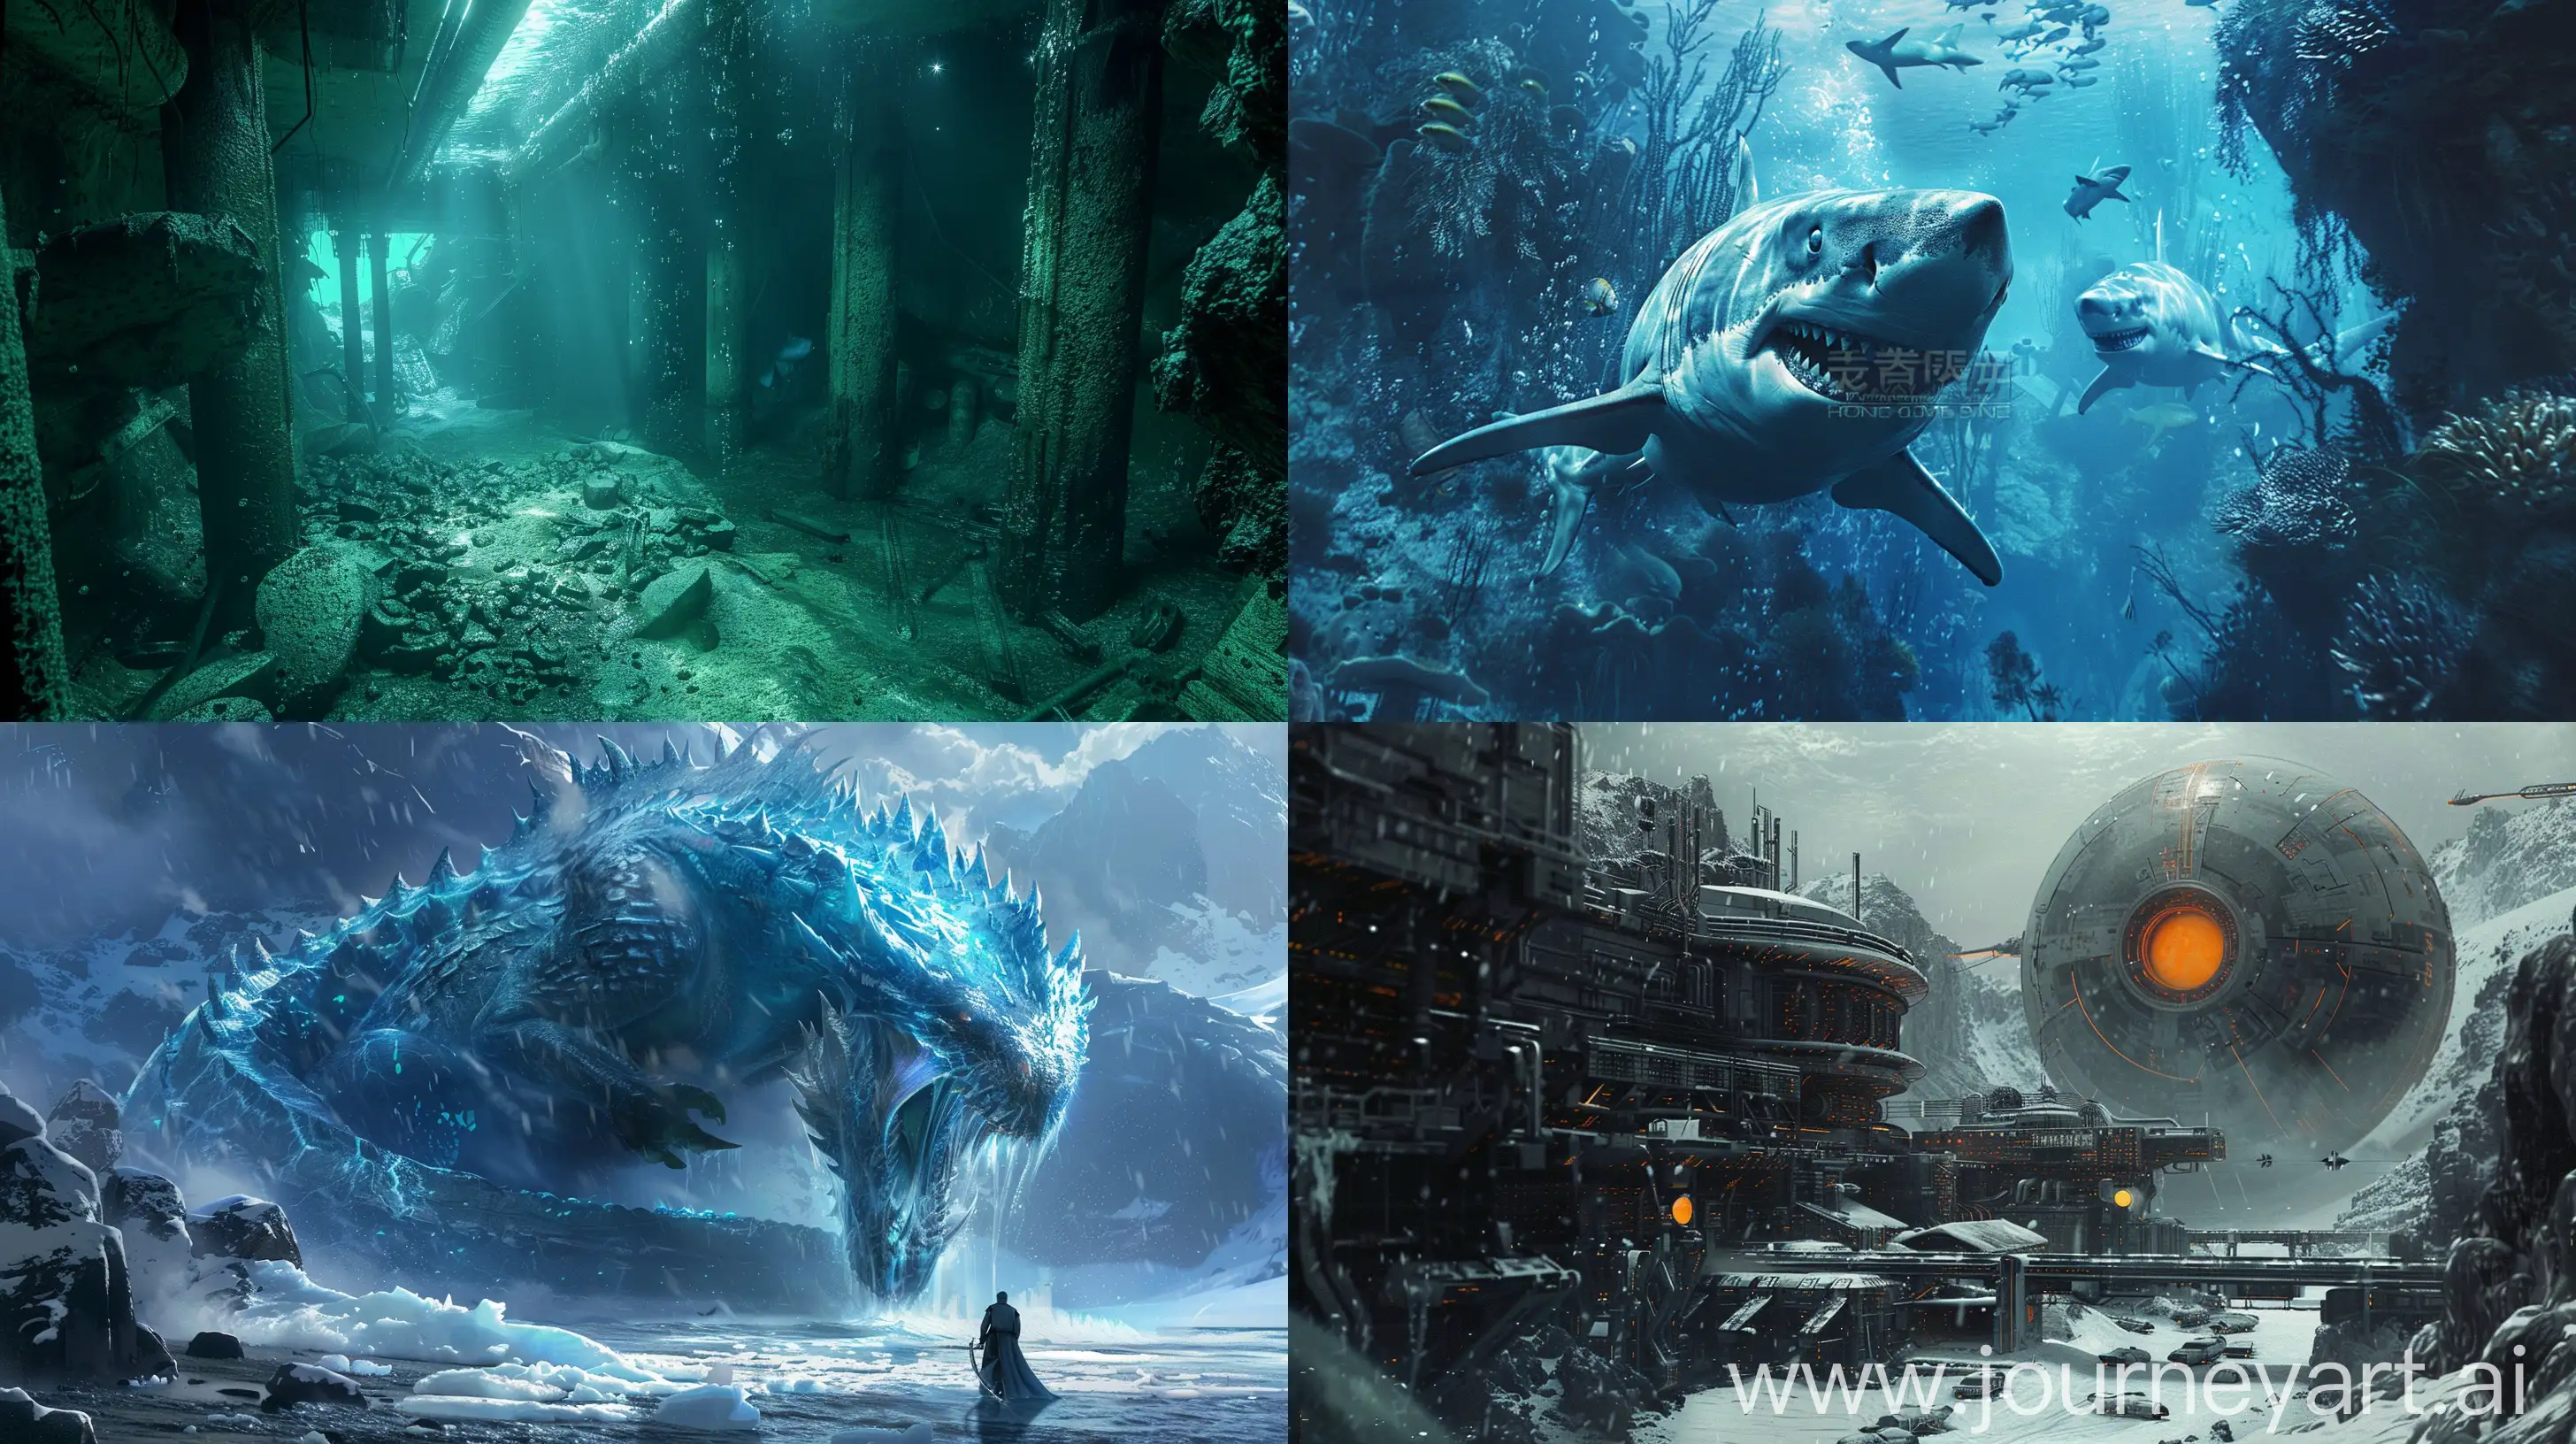 22-year-old Chinese square round face handsome boy:: 4, the front panorama meets the sea monster in the undersea world., cinematic, Ice, Underwater world::3, 3D design::2, Titanic style, --ar 16:9 